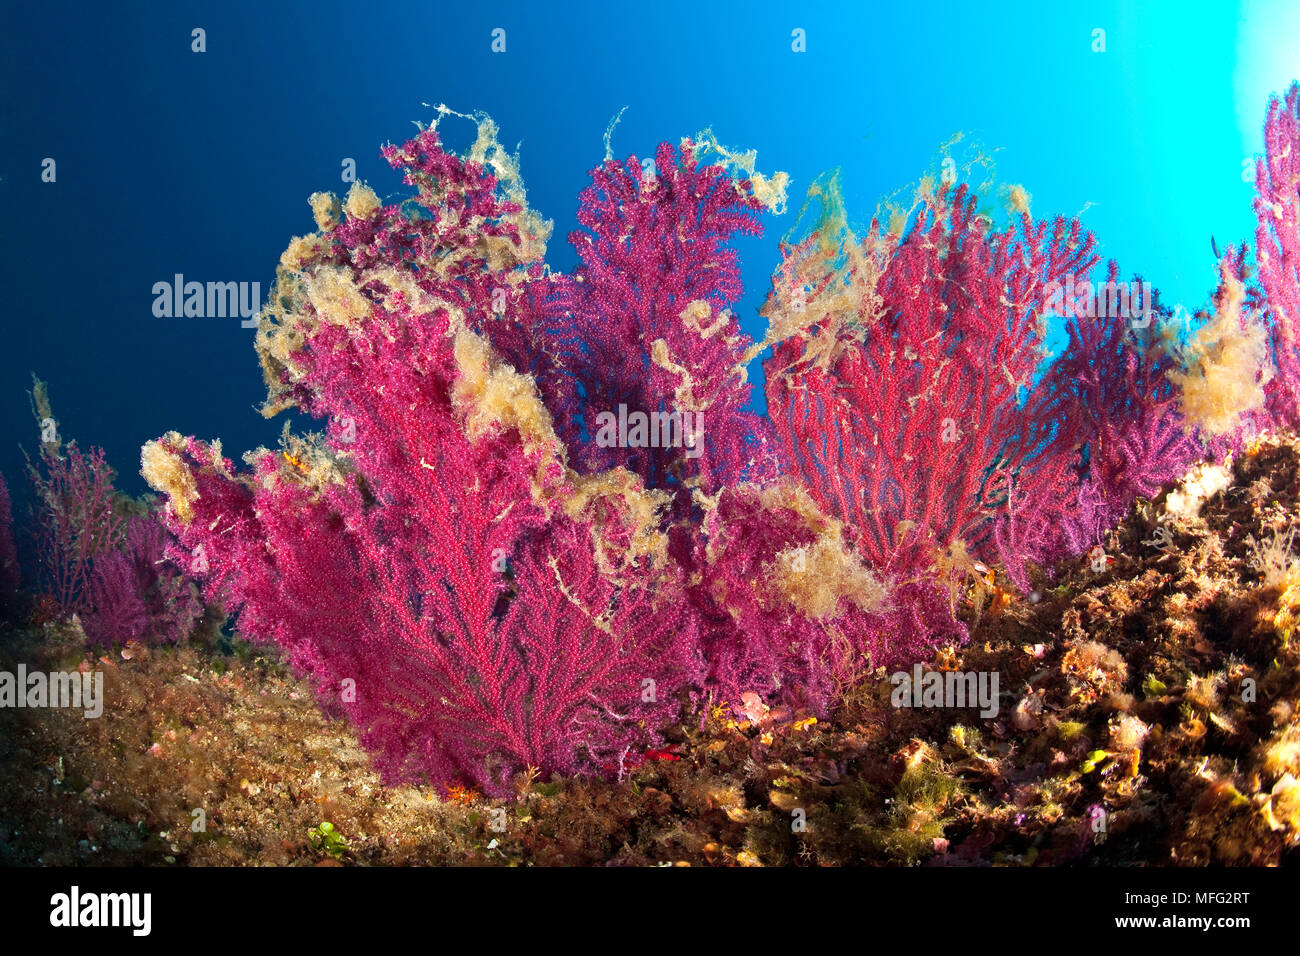 Seafan, Red Gorgonian, Paramuricea clavata covered with mucilage, Vervece rock, Marine Protected area Punta Campanella, Massa Lubrense, Penisola Sorre Stock Photo